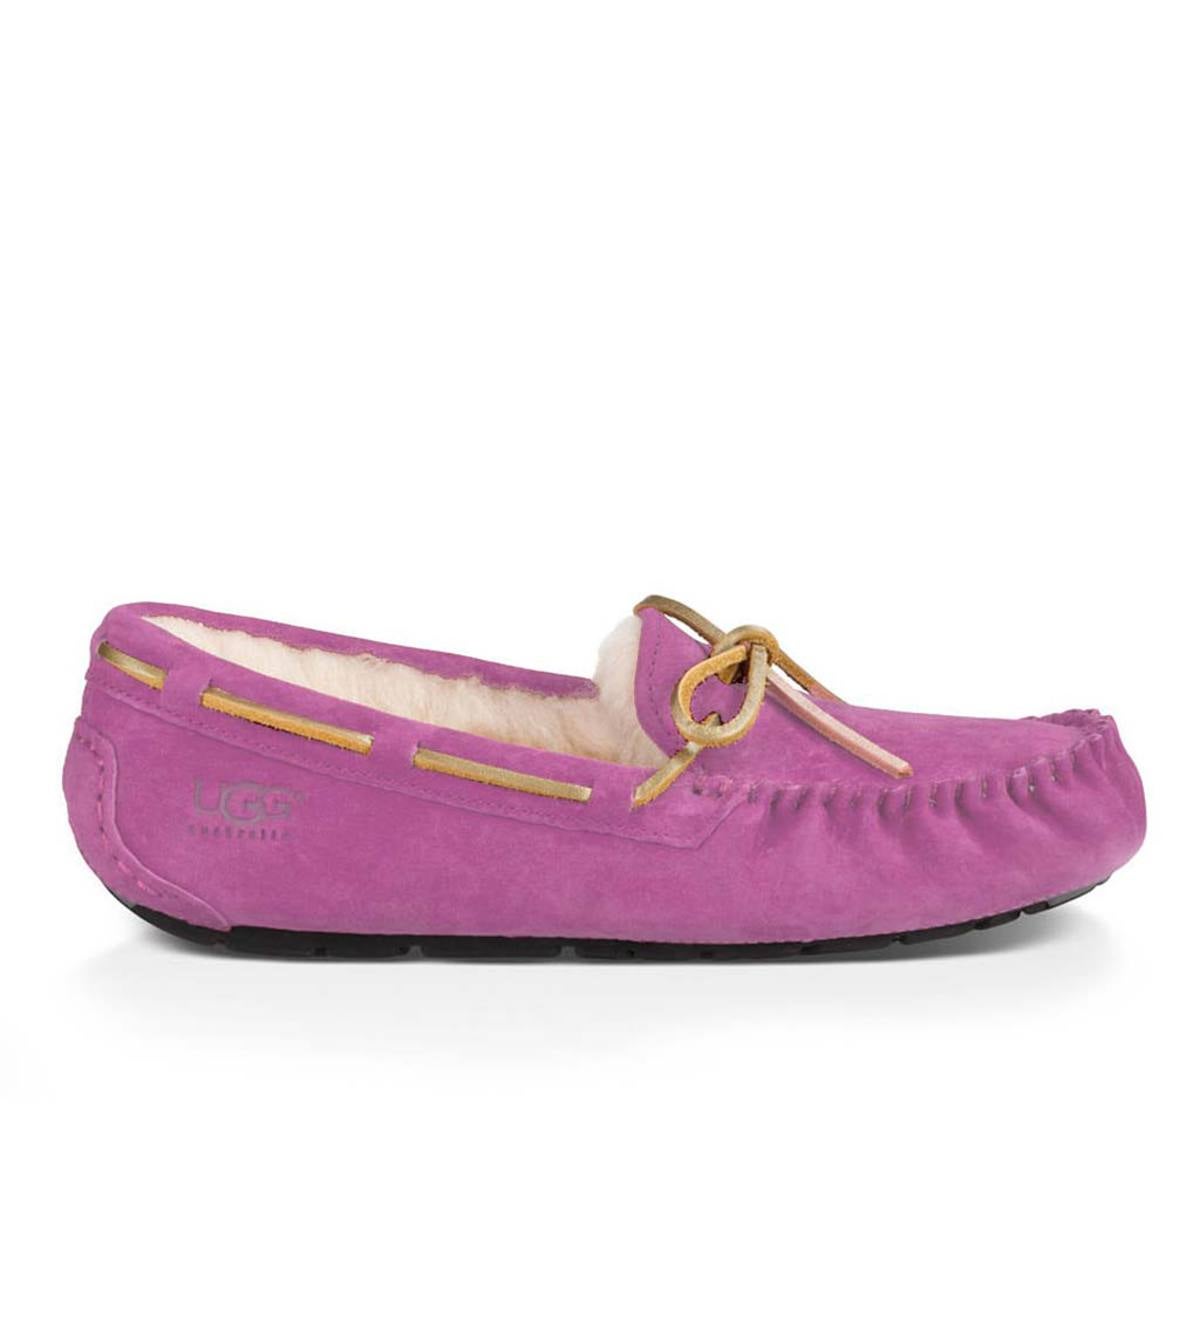 UGG Ansley Moccasin Slippers - Bodacious - Size 6